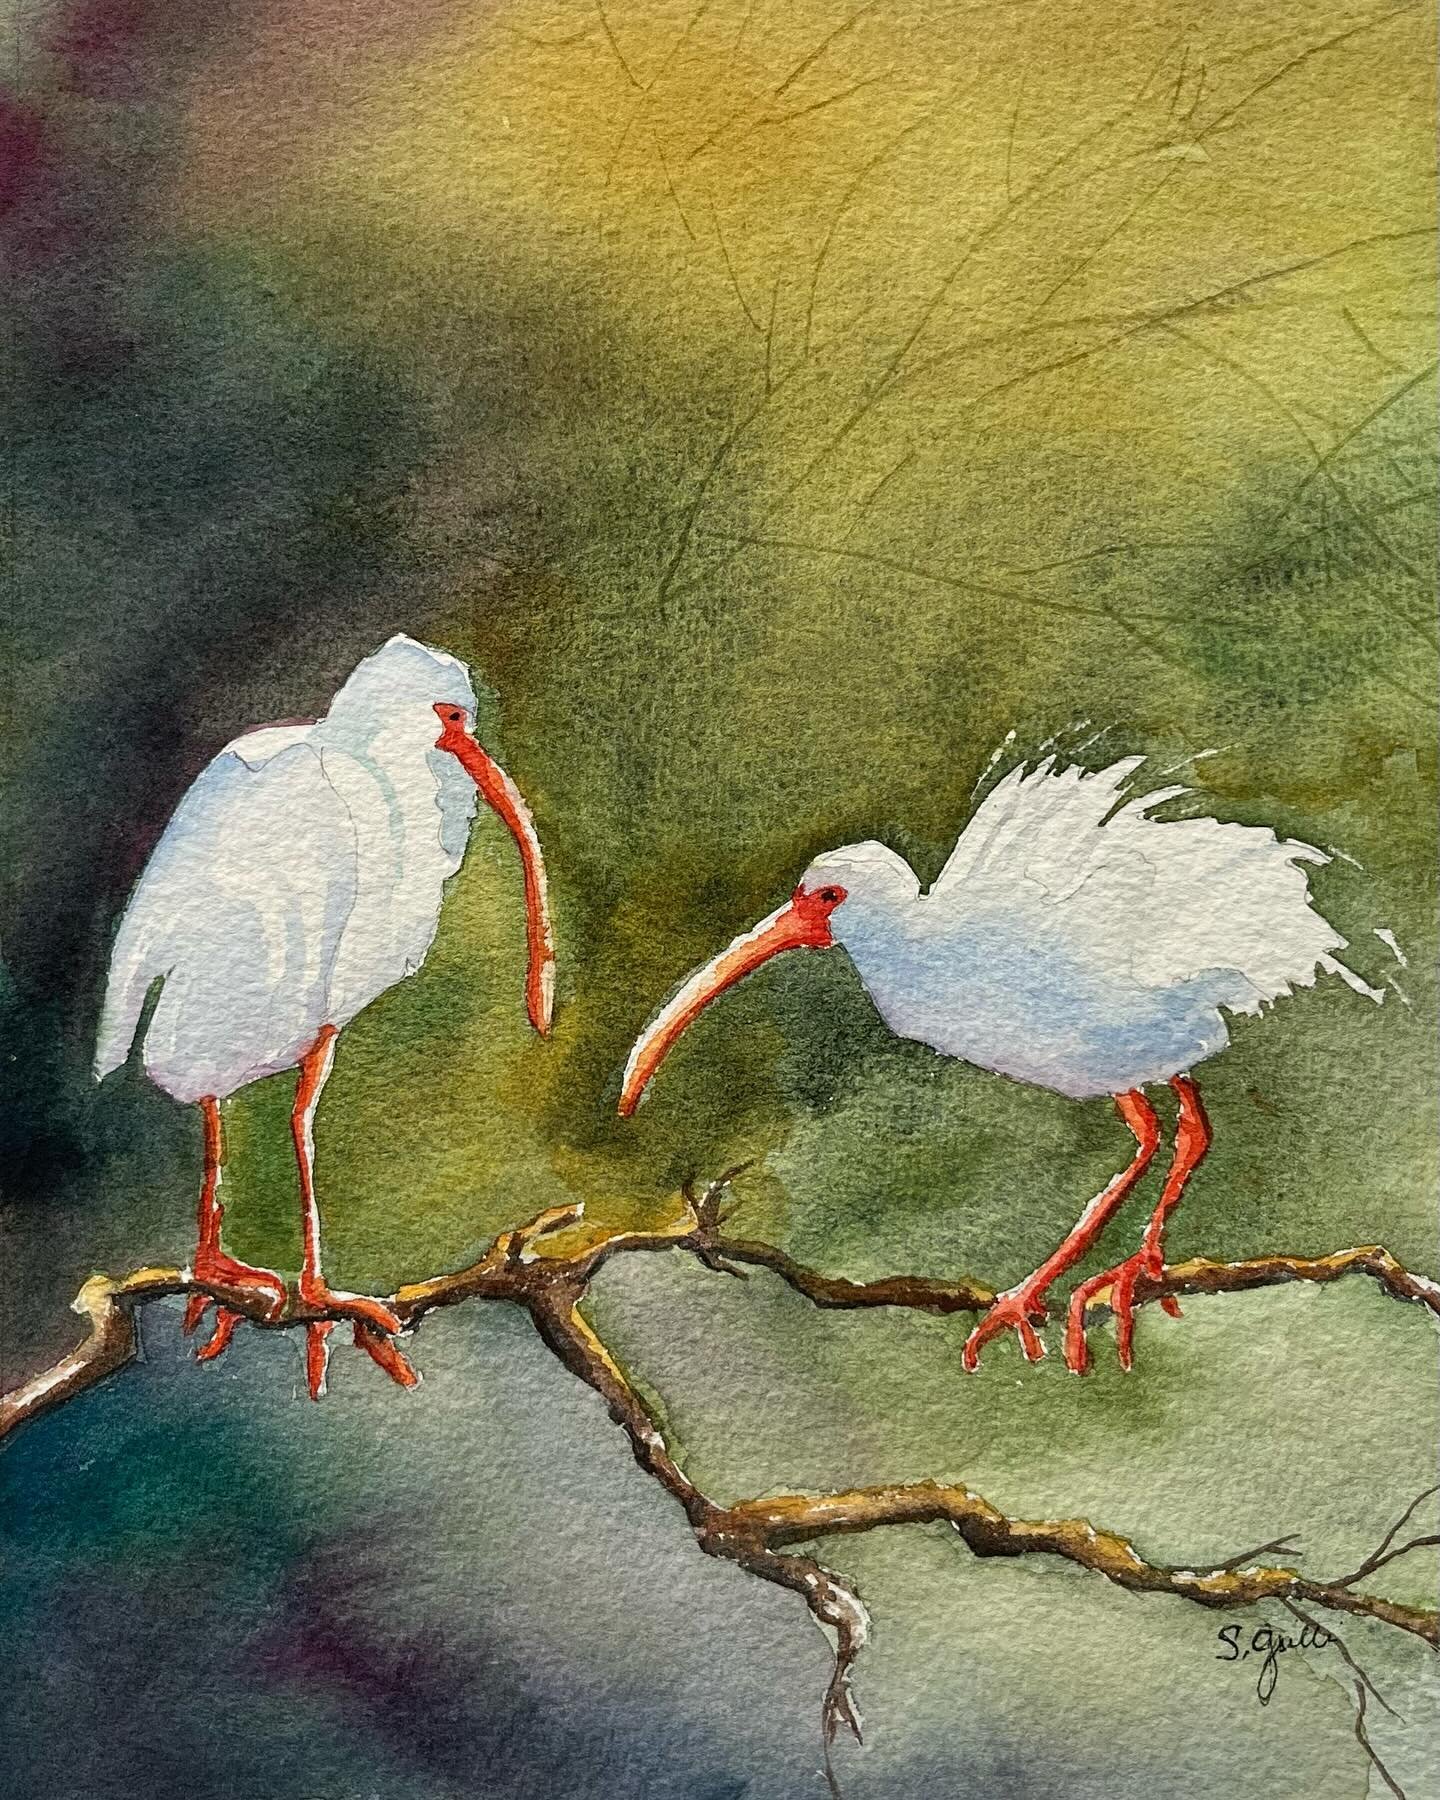 These two birds are flying the coop and heading to La Petite Gallerie today. Watercolor painting 11x14. 
#blufftonarts #blufftonliving #blufftonartsdistrict#shopoldtownbluffton #coastalart #lowcountryliving #blufftonartgalleries
#lapetitegallerie9 #s